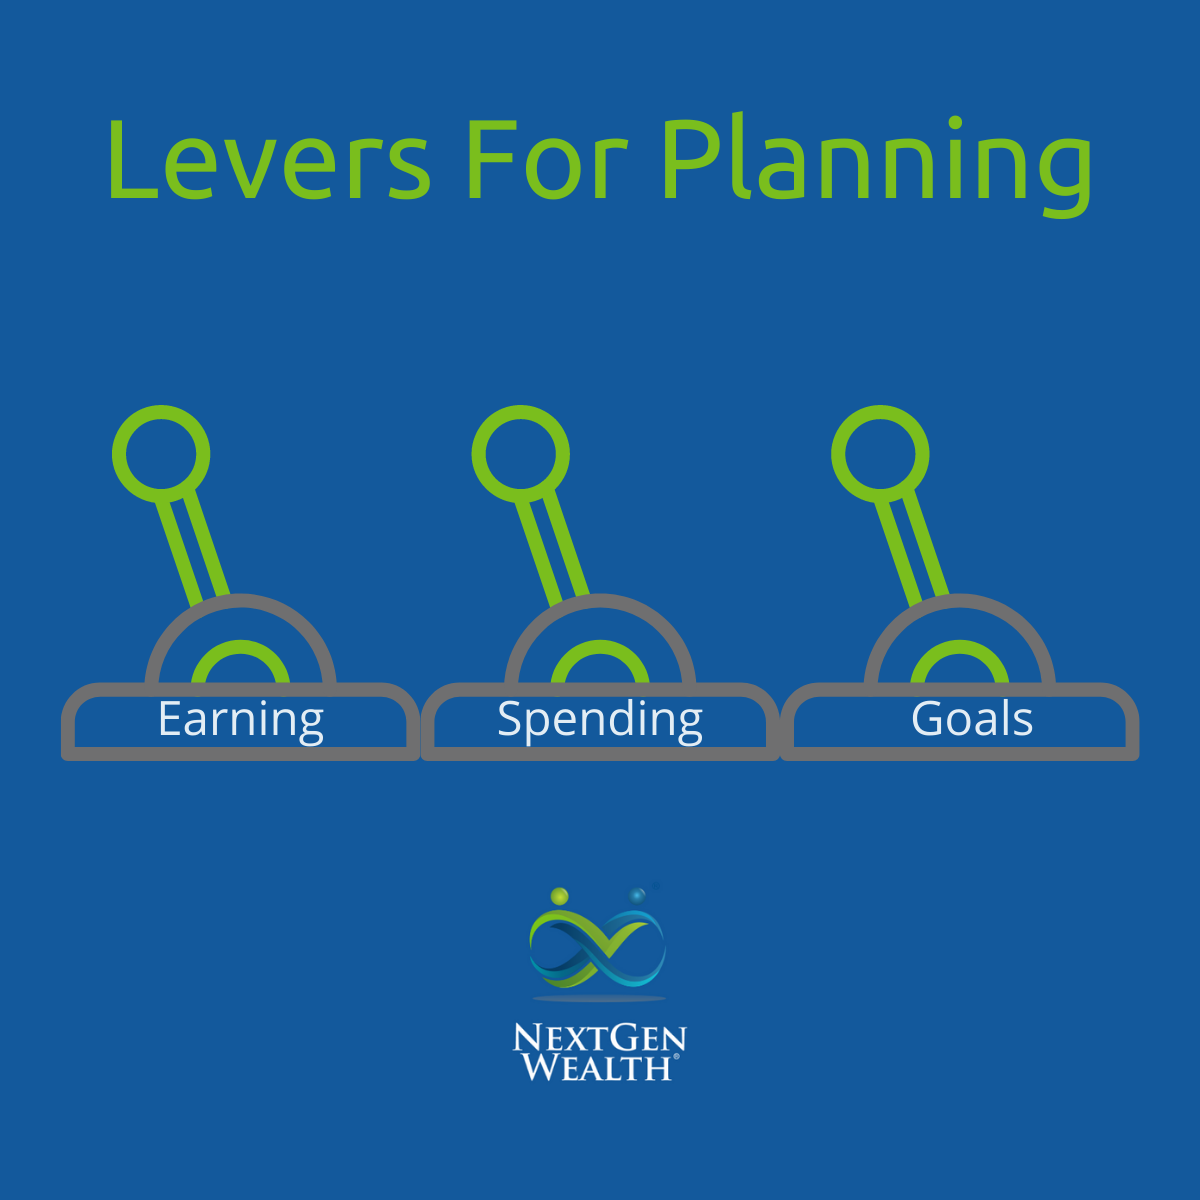 Levers For Planning